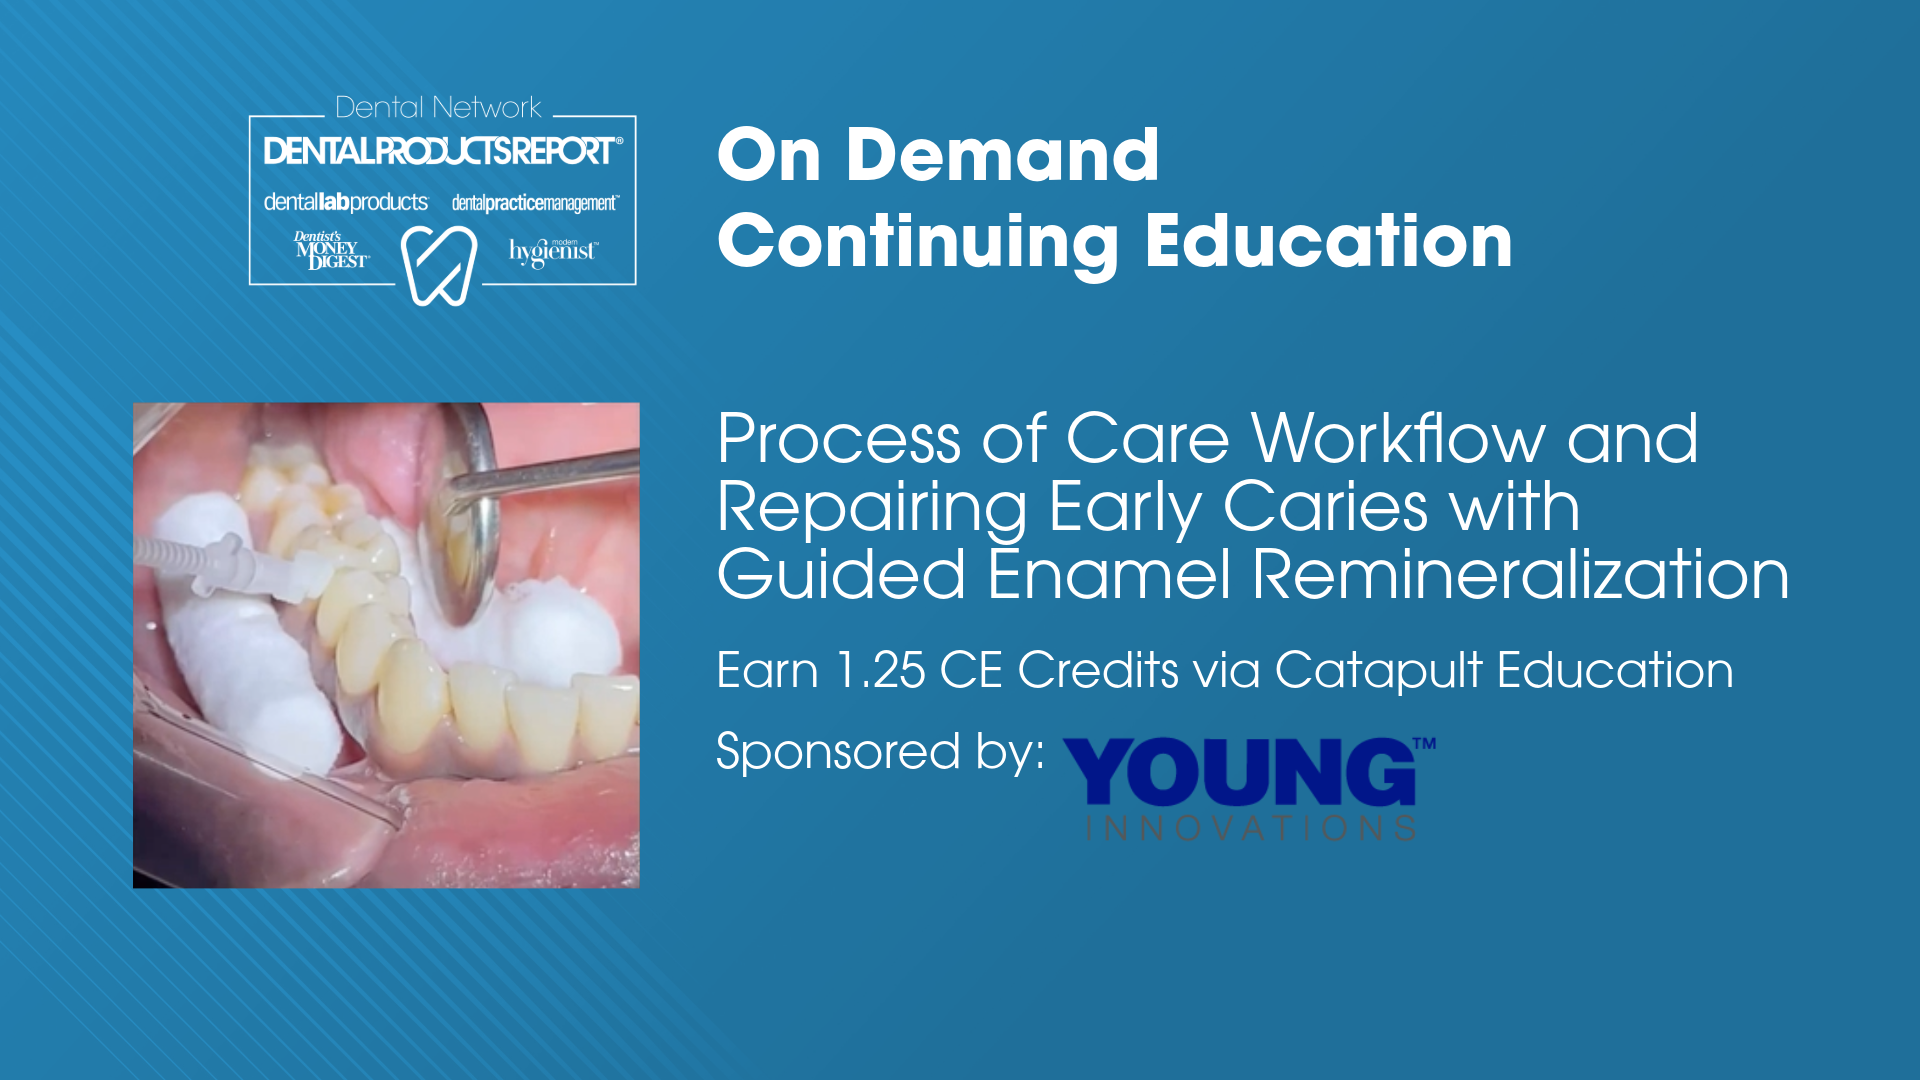 Process of Care Workflow and Repairing Early Caries with Guided Enamel Remineralization